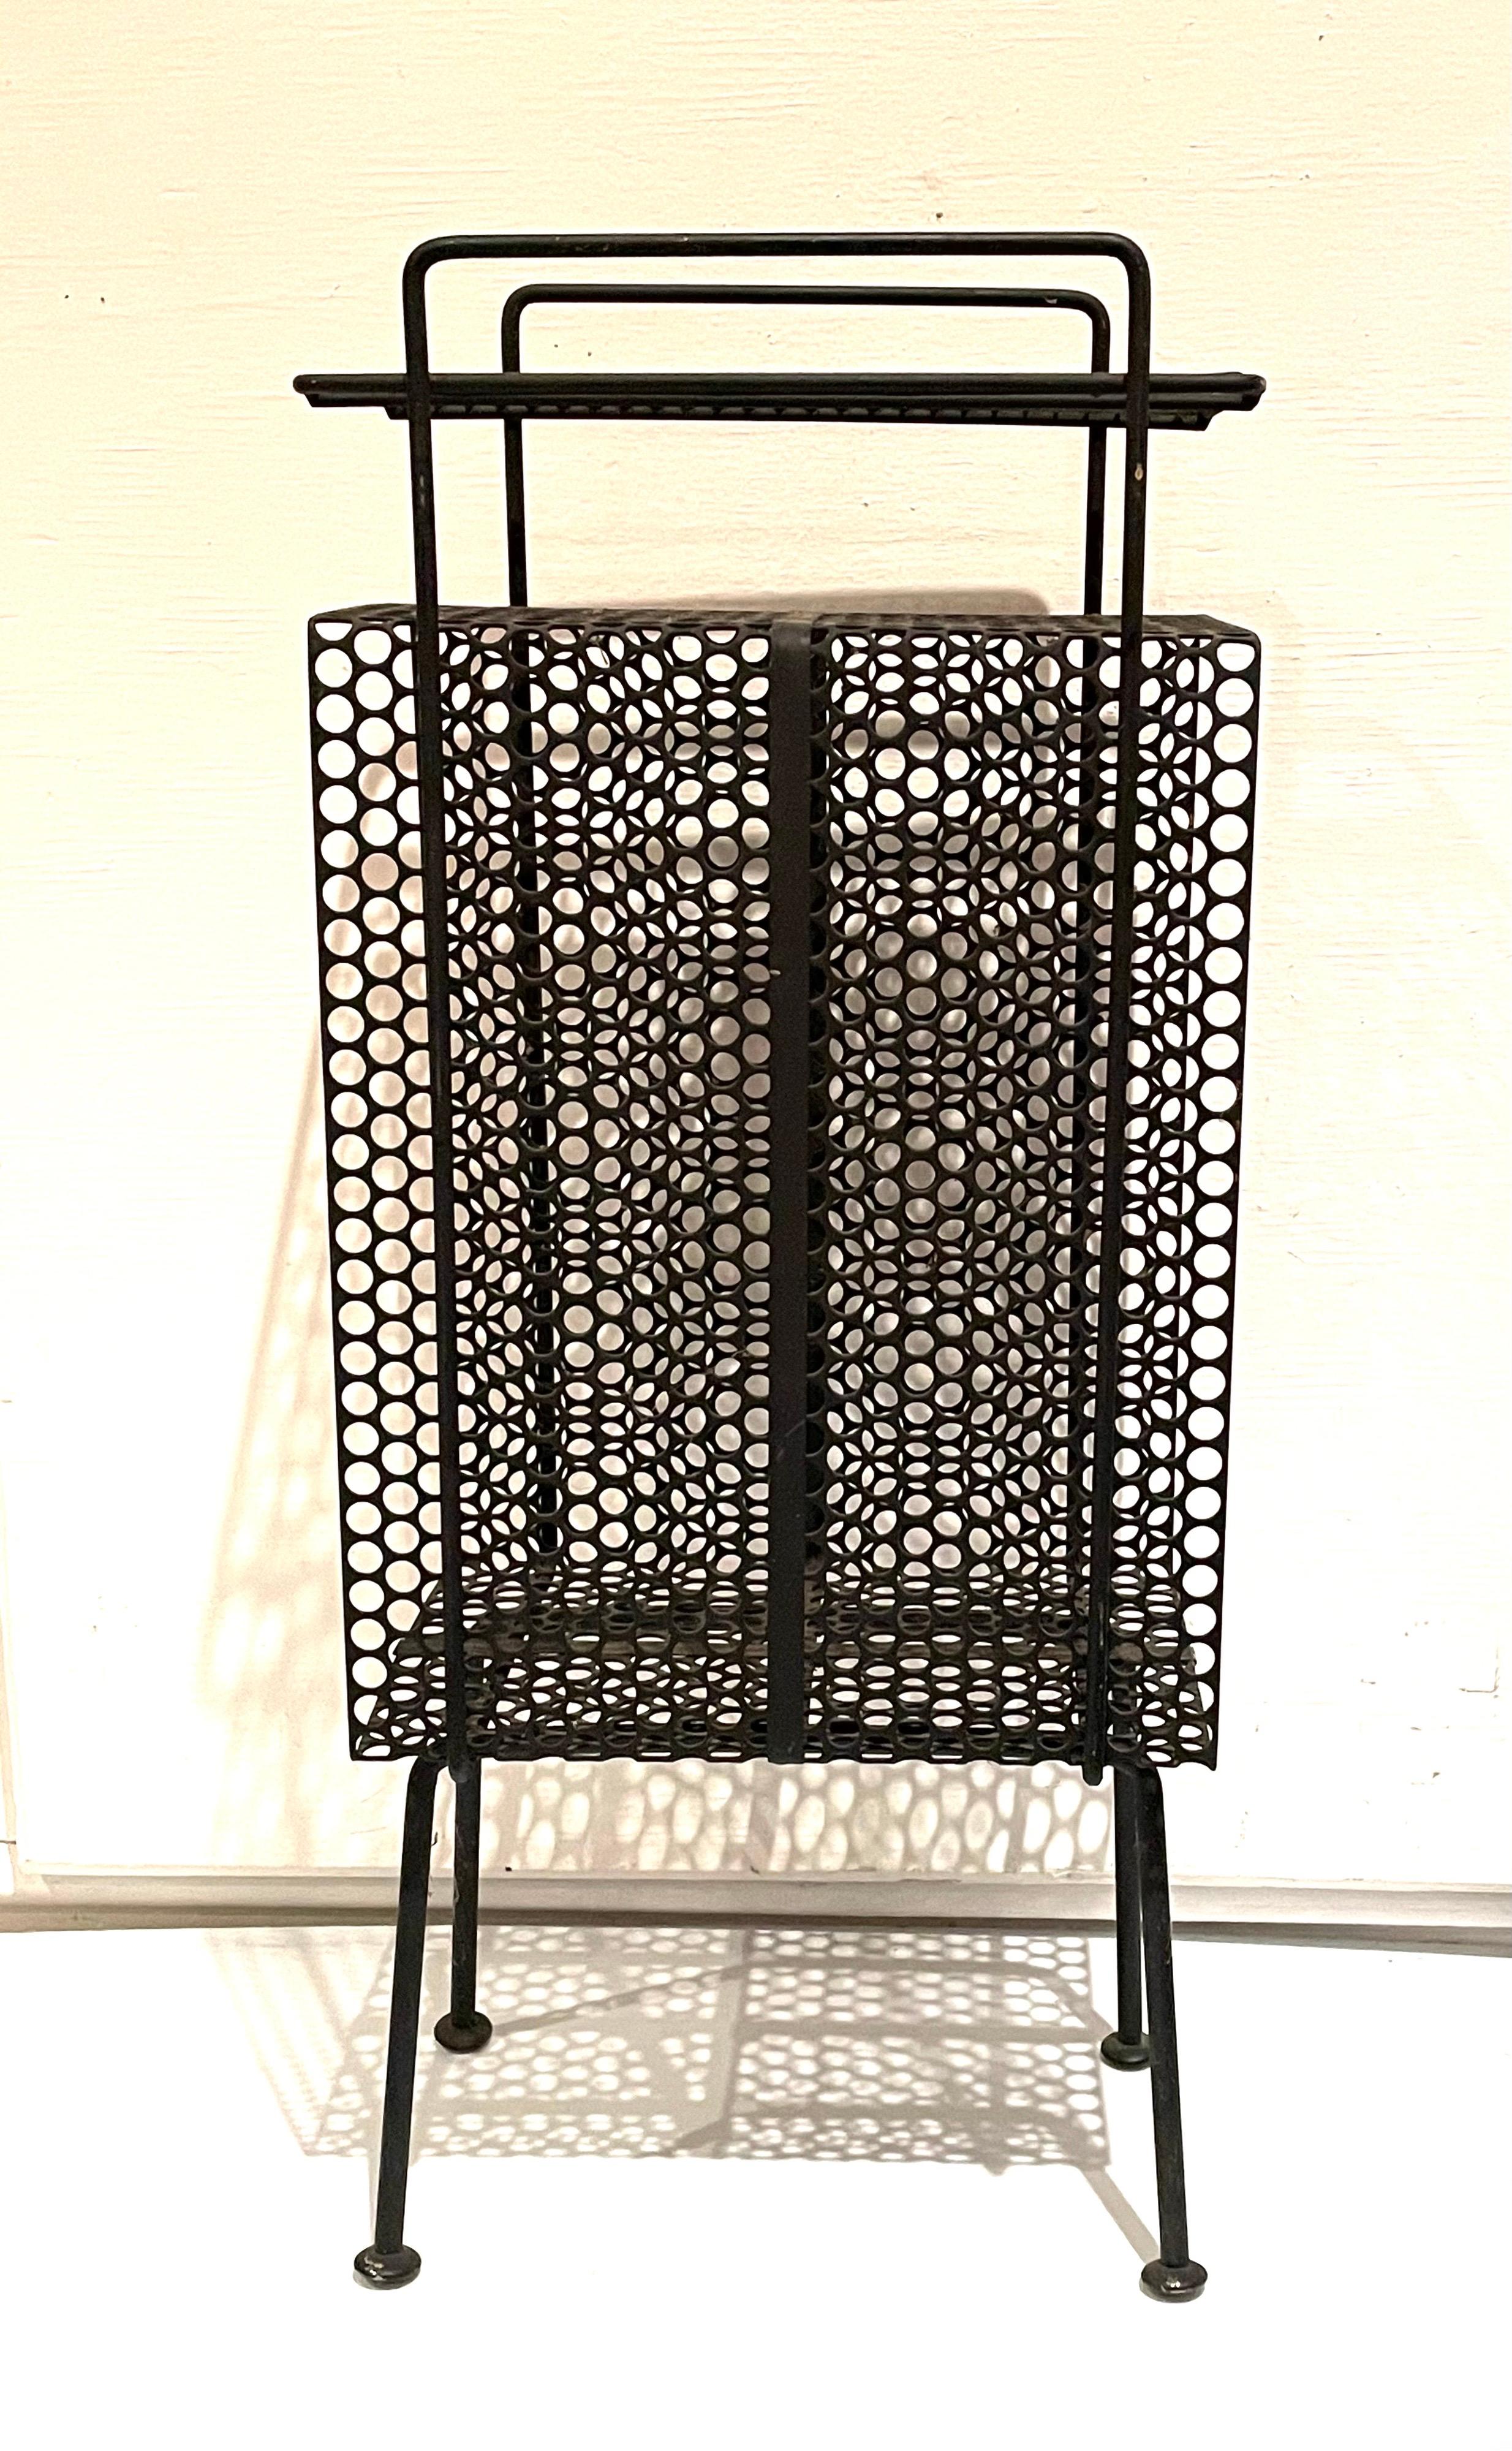 American Richard Galef Wire Perforated Metal Stand/ Rack in Black Finish